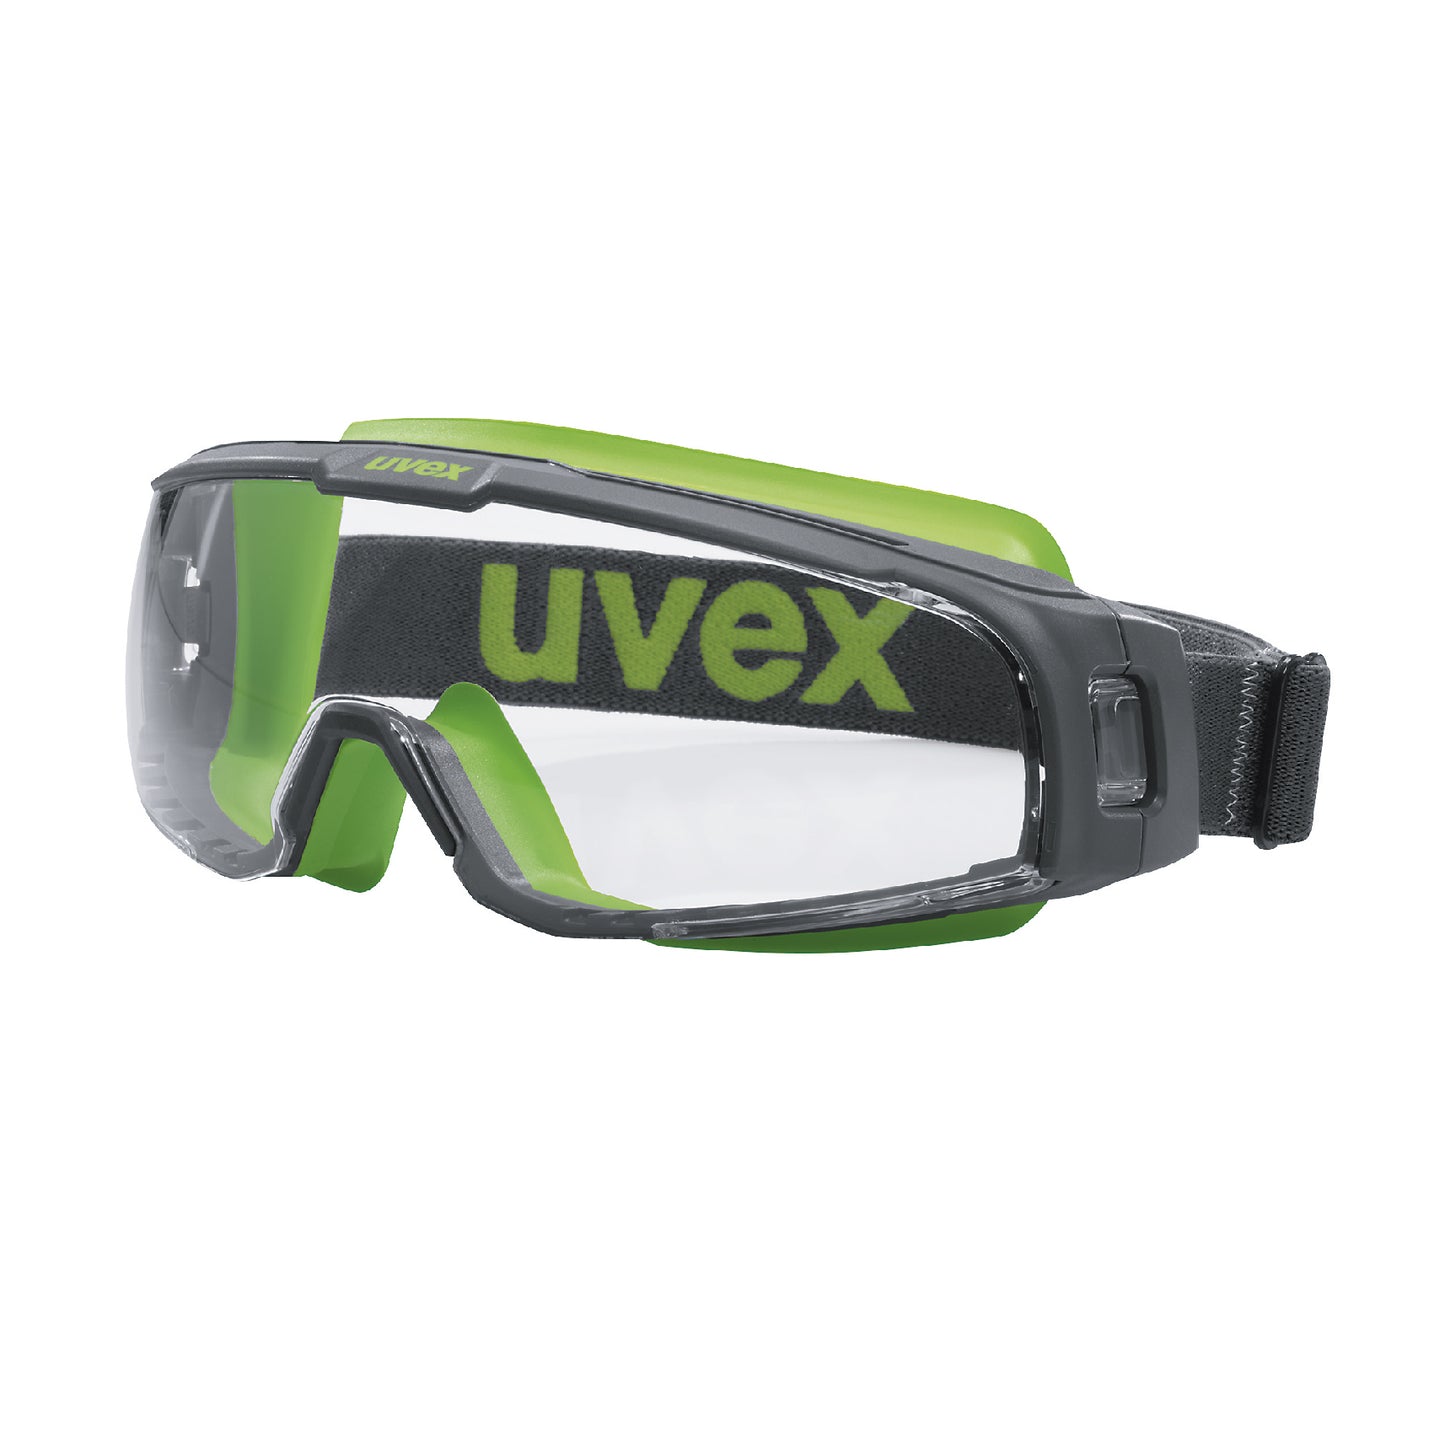 uvex-U-sonic safety goggles 9308245 clear lens compact size